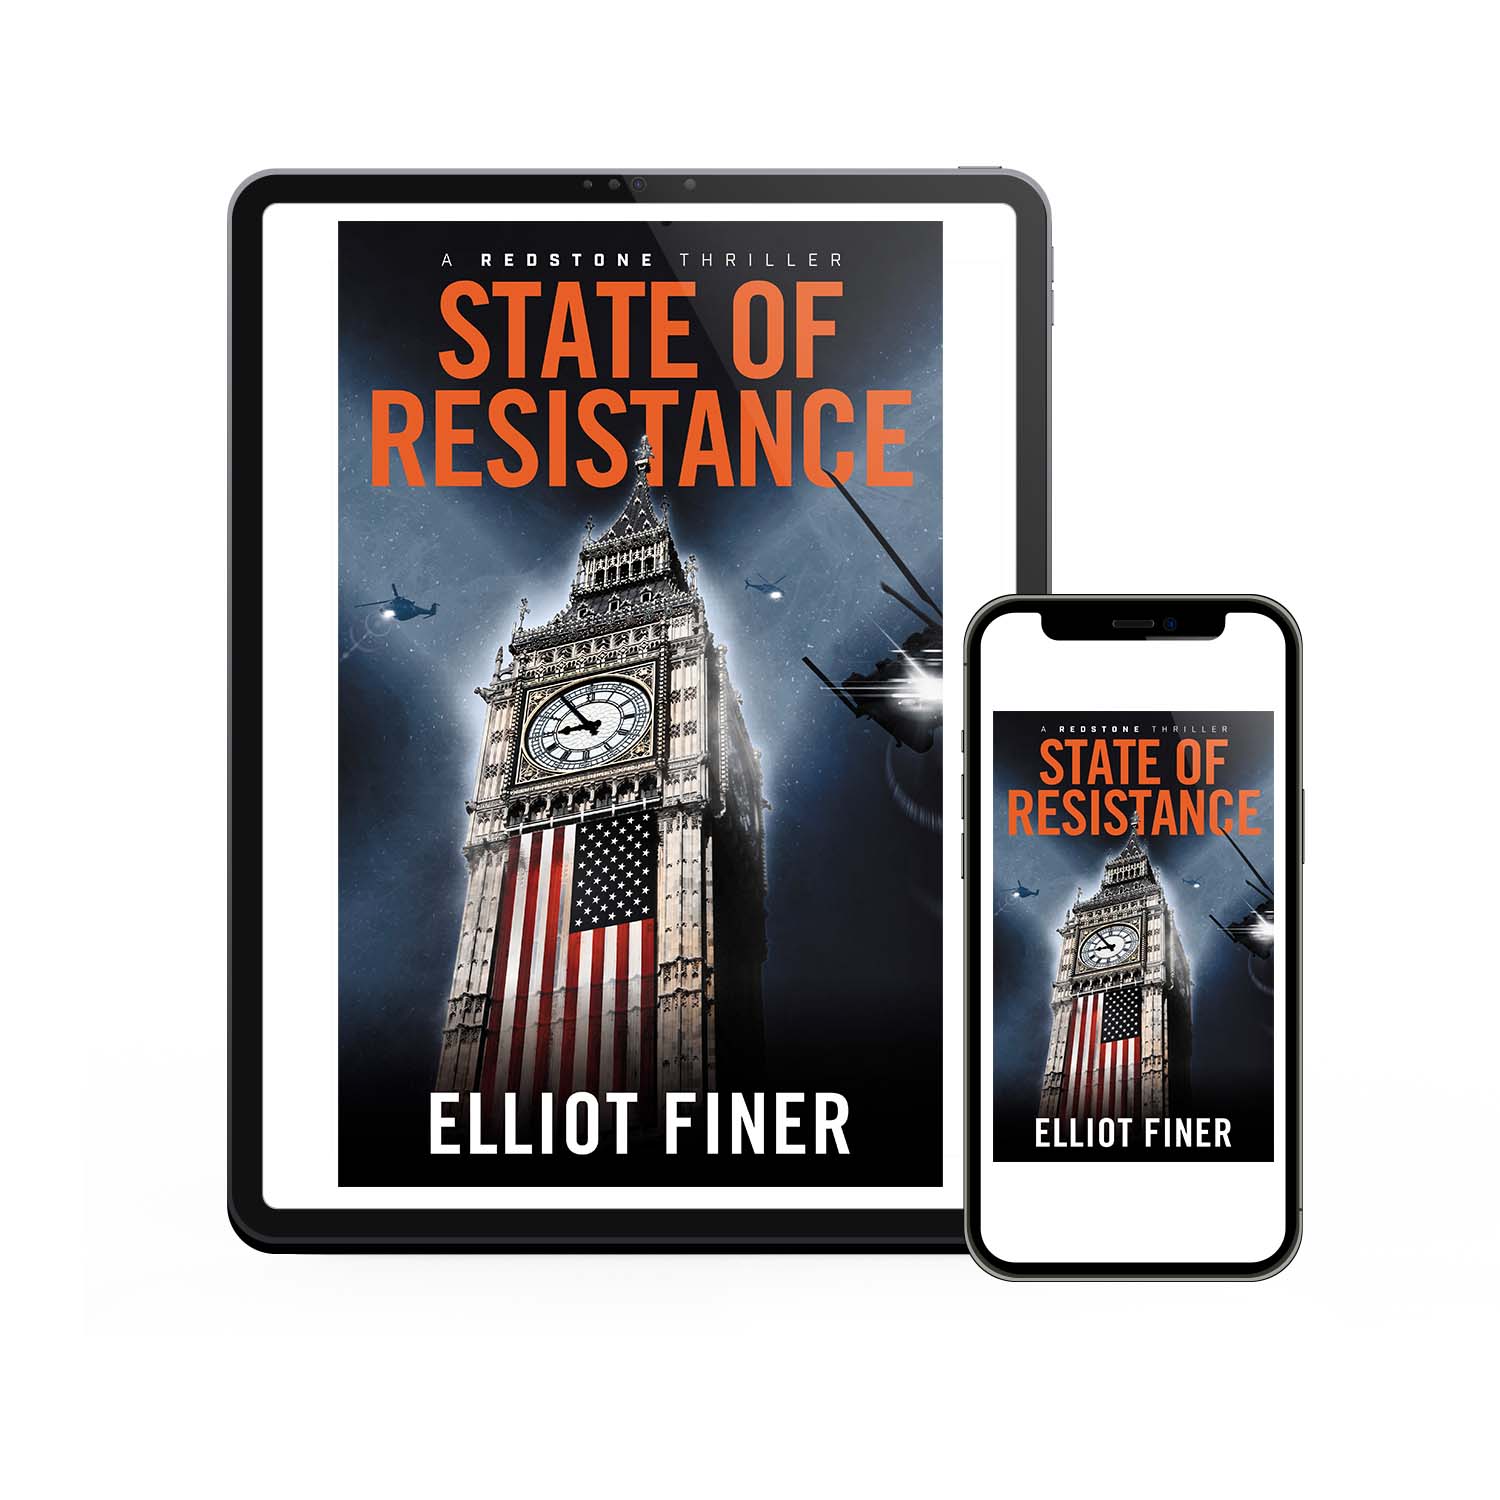 'State of Resistance' is a twisting near-future conspiracy thriller. The author is Elliot Finer. The book cover was designed by Mark Thomas of coverness.com. To find out more about my book design services, please visit www.coverness.com